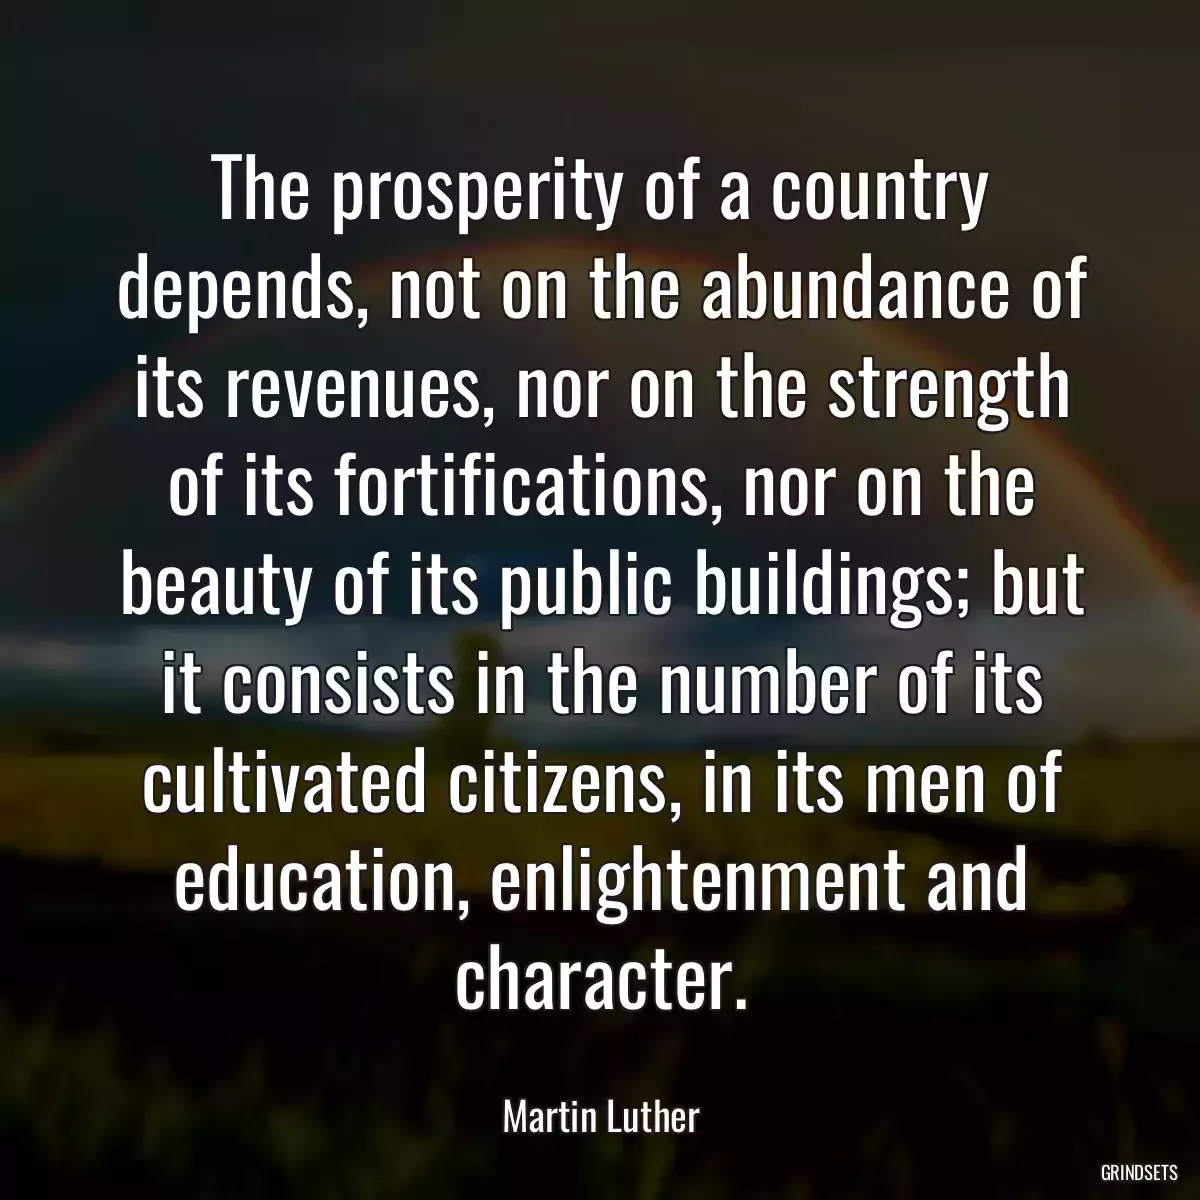 The prosperity of a country depends, not on the abundance of its revenues, nor on the strength of its fortifications, nor on the beauty of its public buildings; but it consists in the number of its cultivated citizens, in its men of education, enlightenment and character.